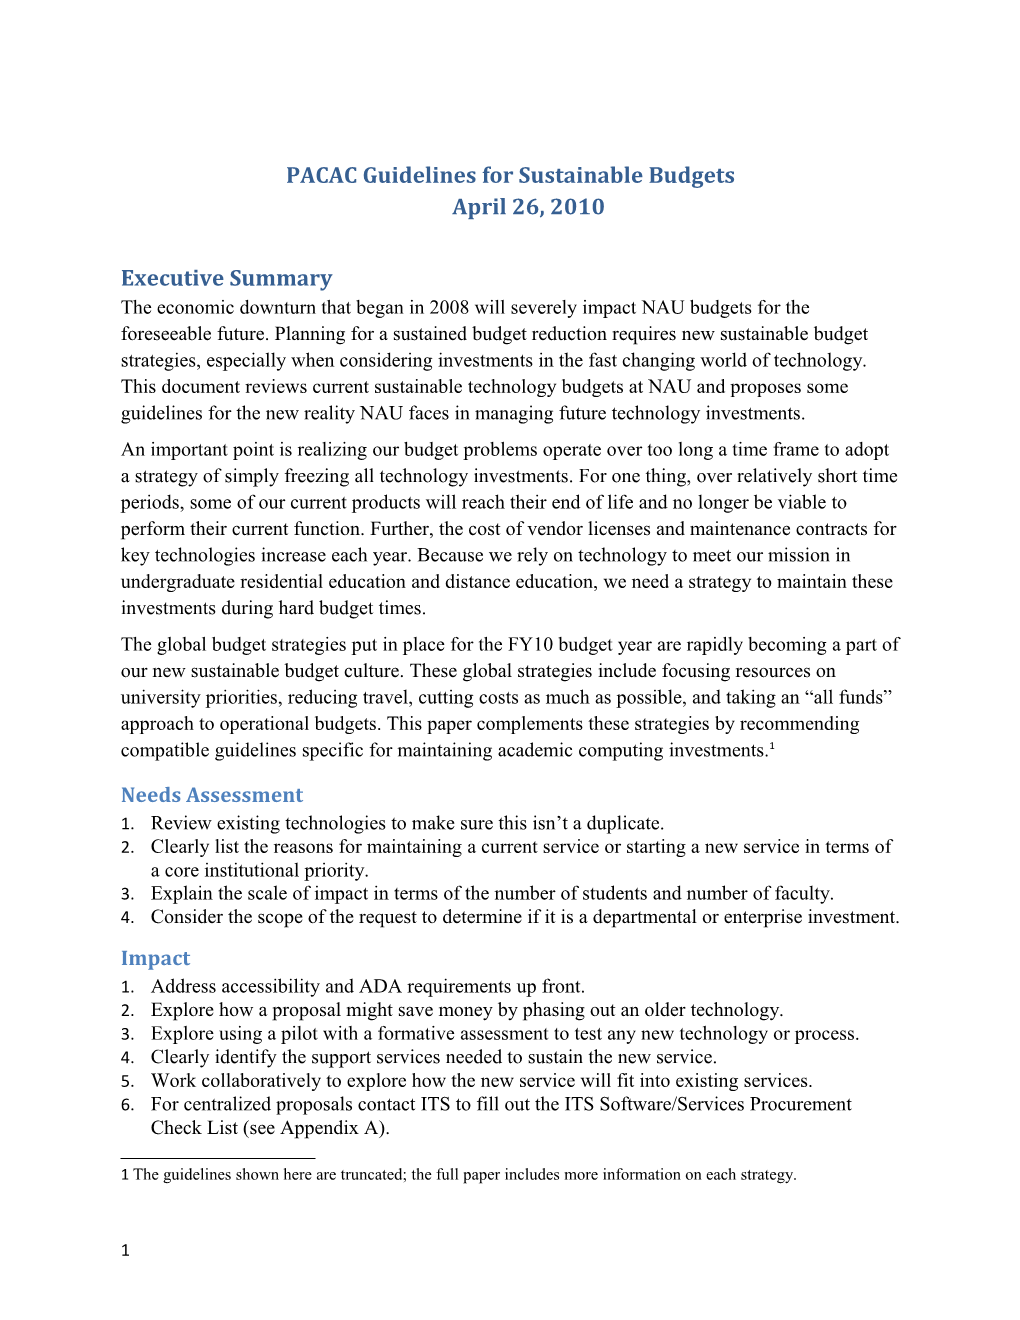 PACAC Guidelines for Sustainable Budgetsapril 26, 2010